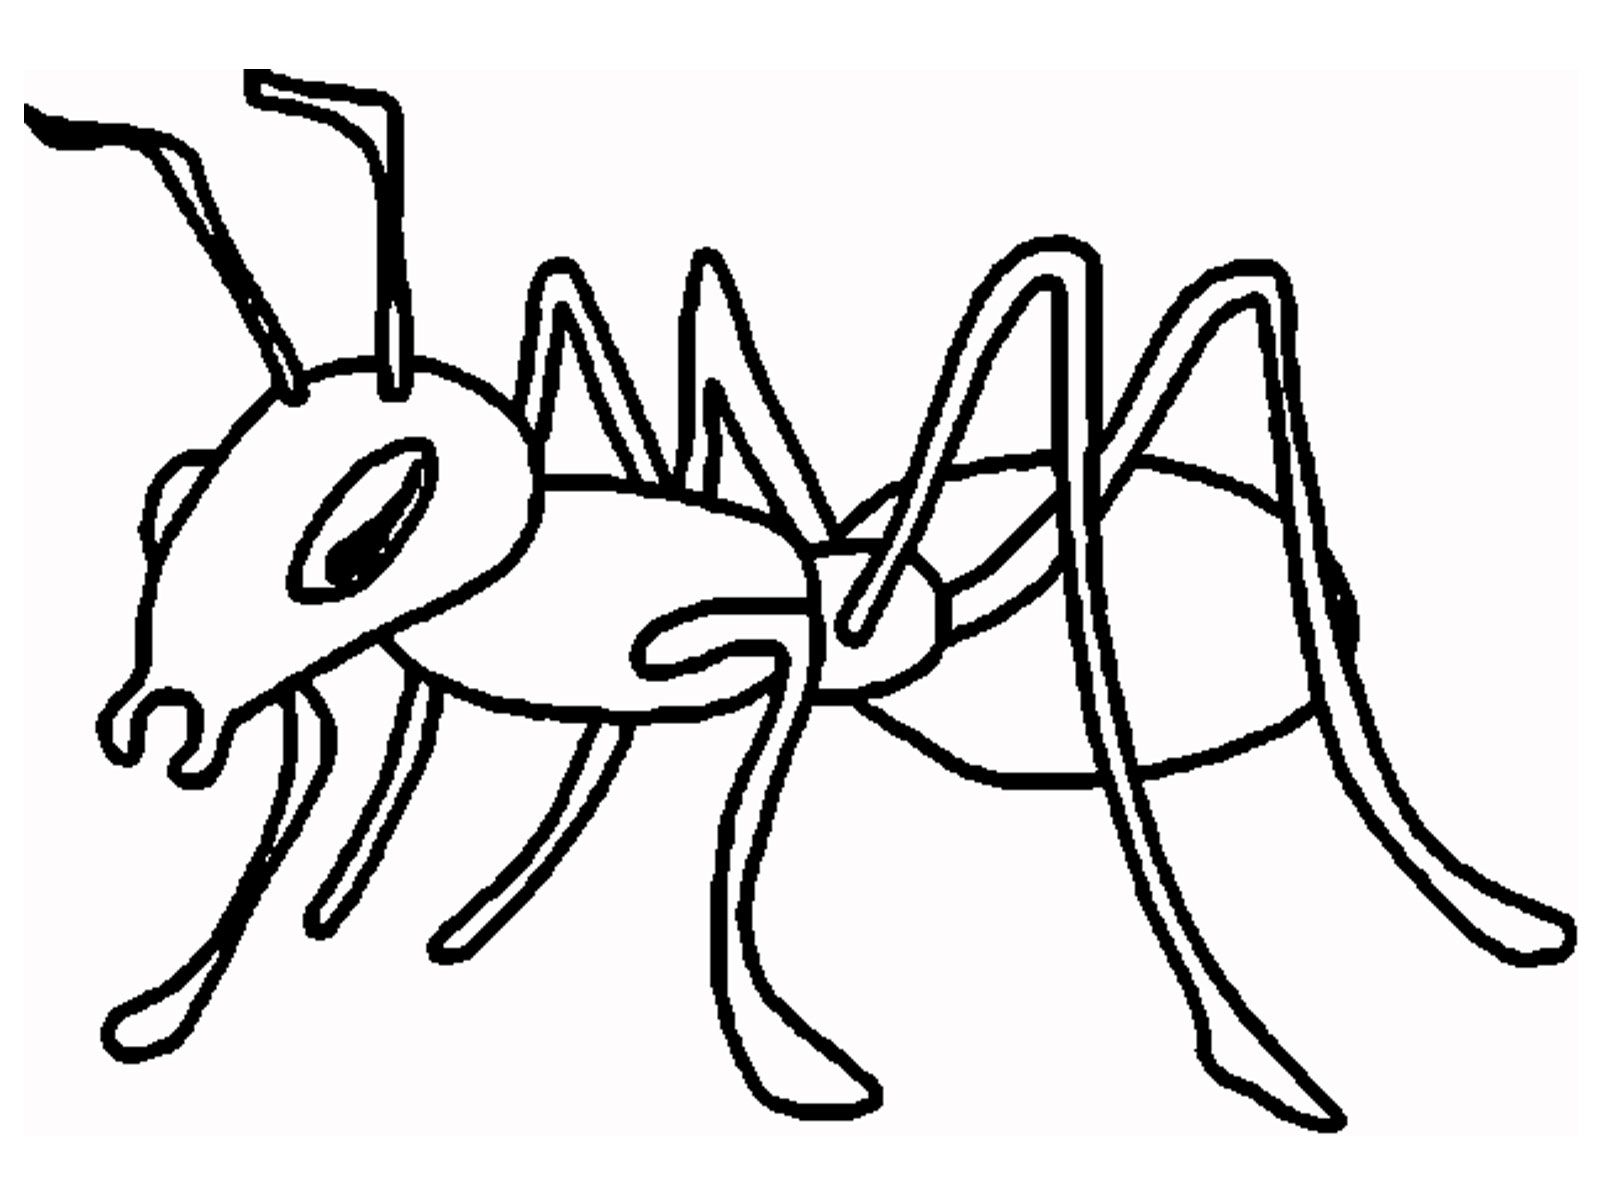 Ant coloring page.